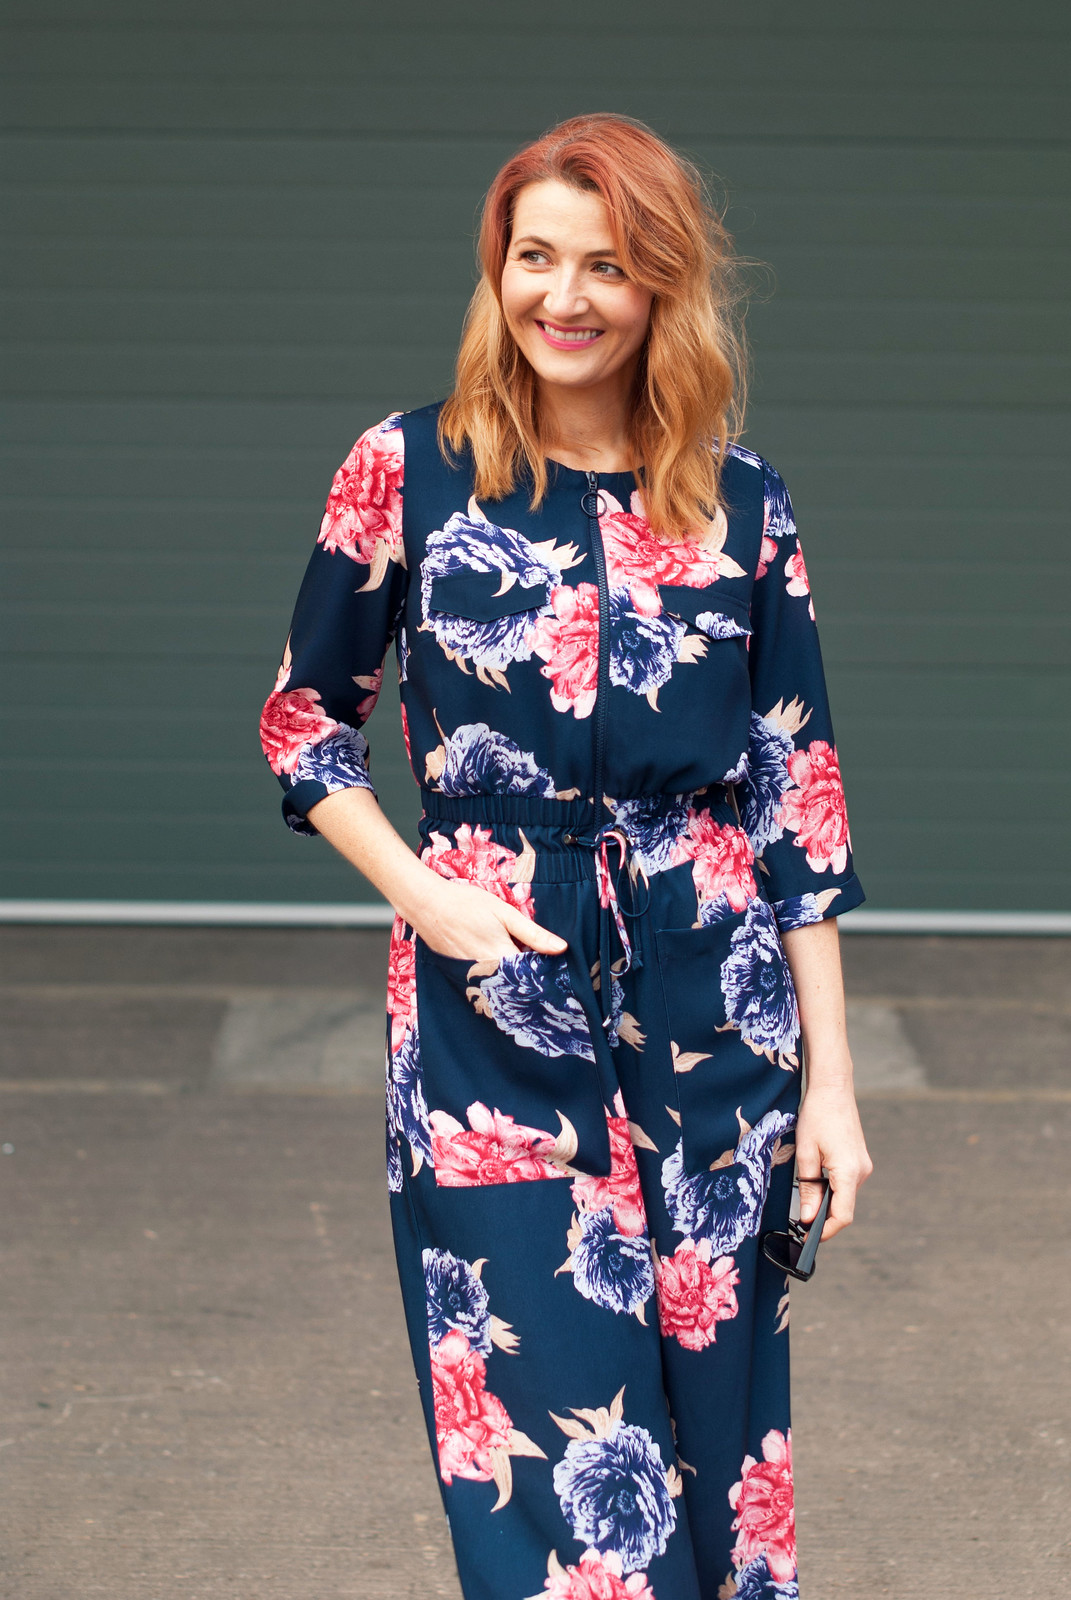 Winter to spring transitional outfit - Blue and pink floral wide leg jumpsuit | Not Dressed As Lamb, over 40 style